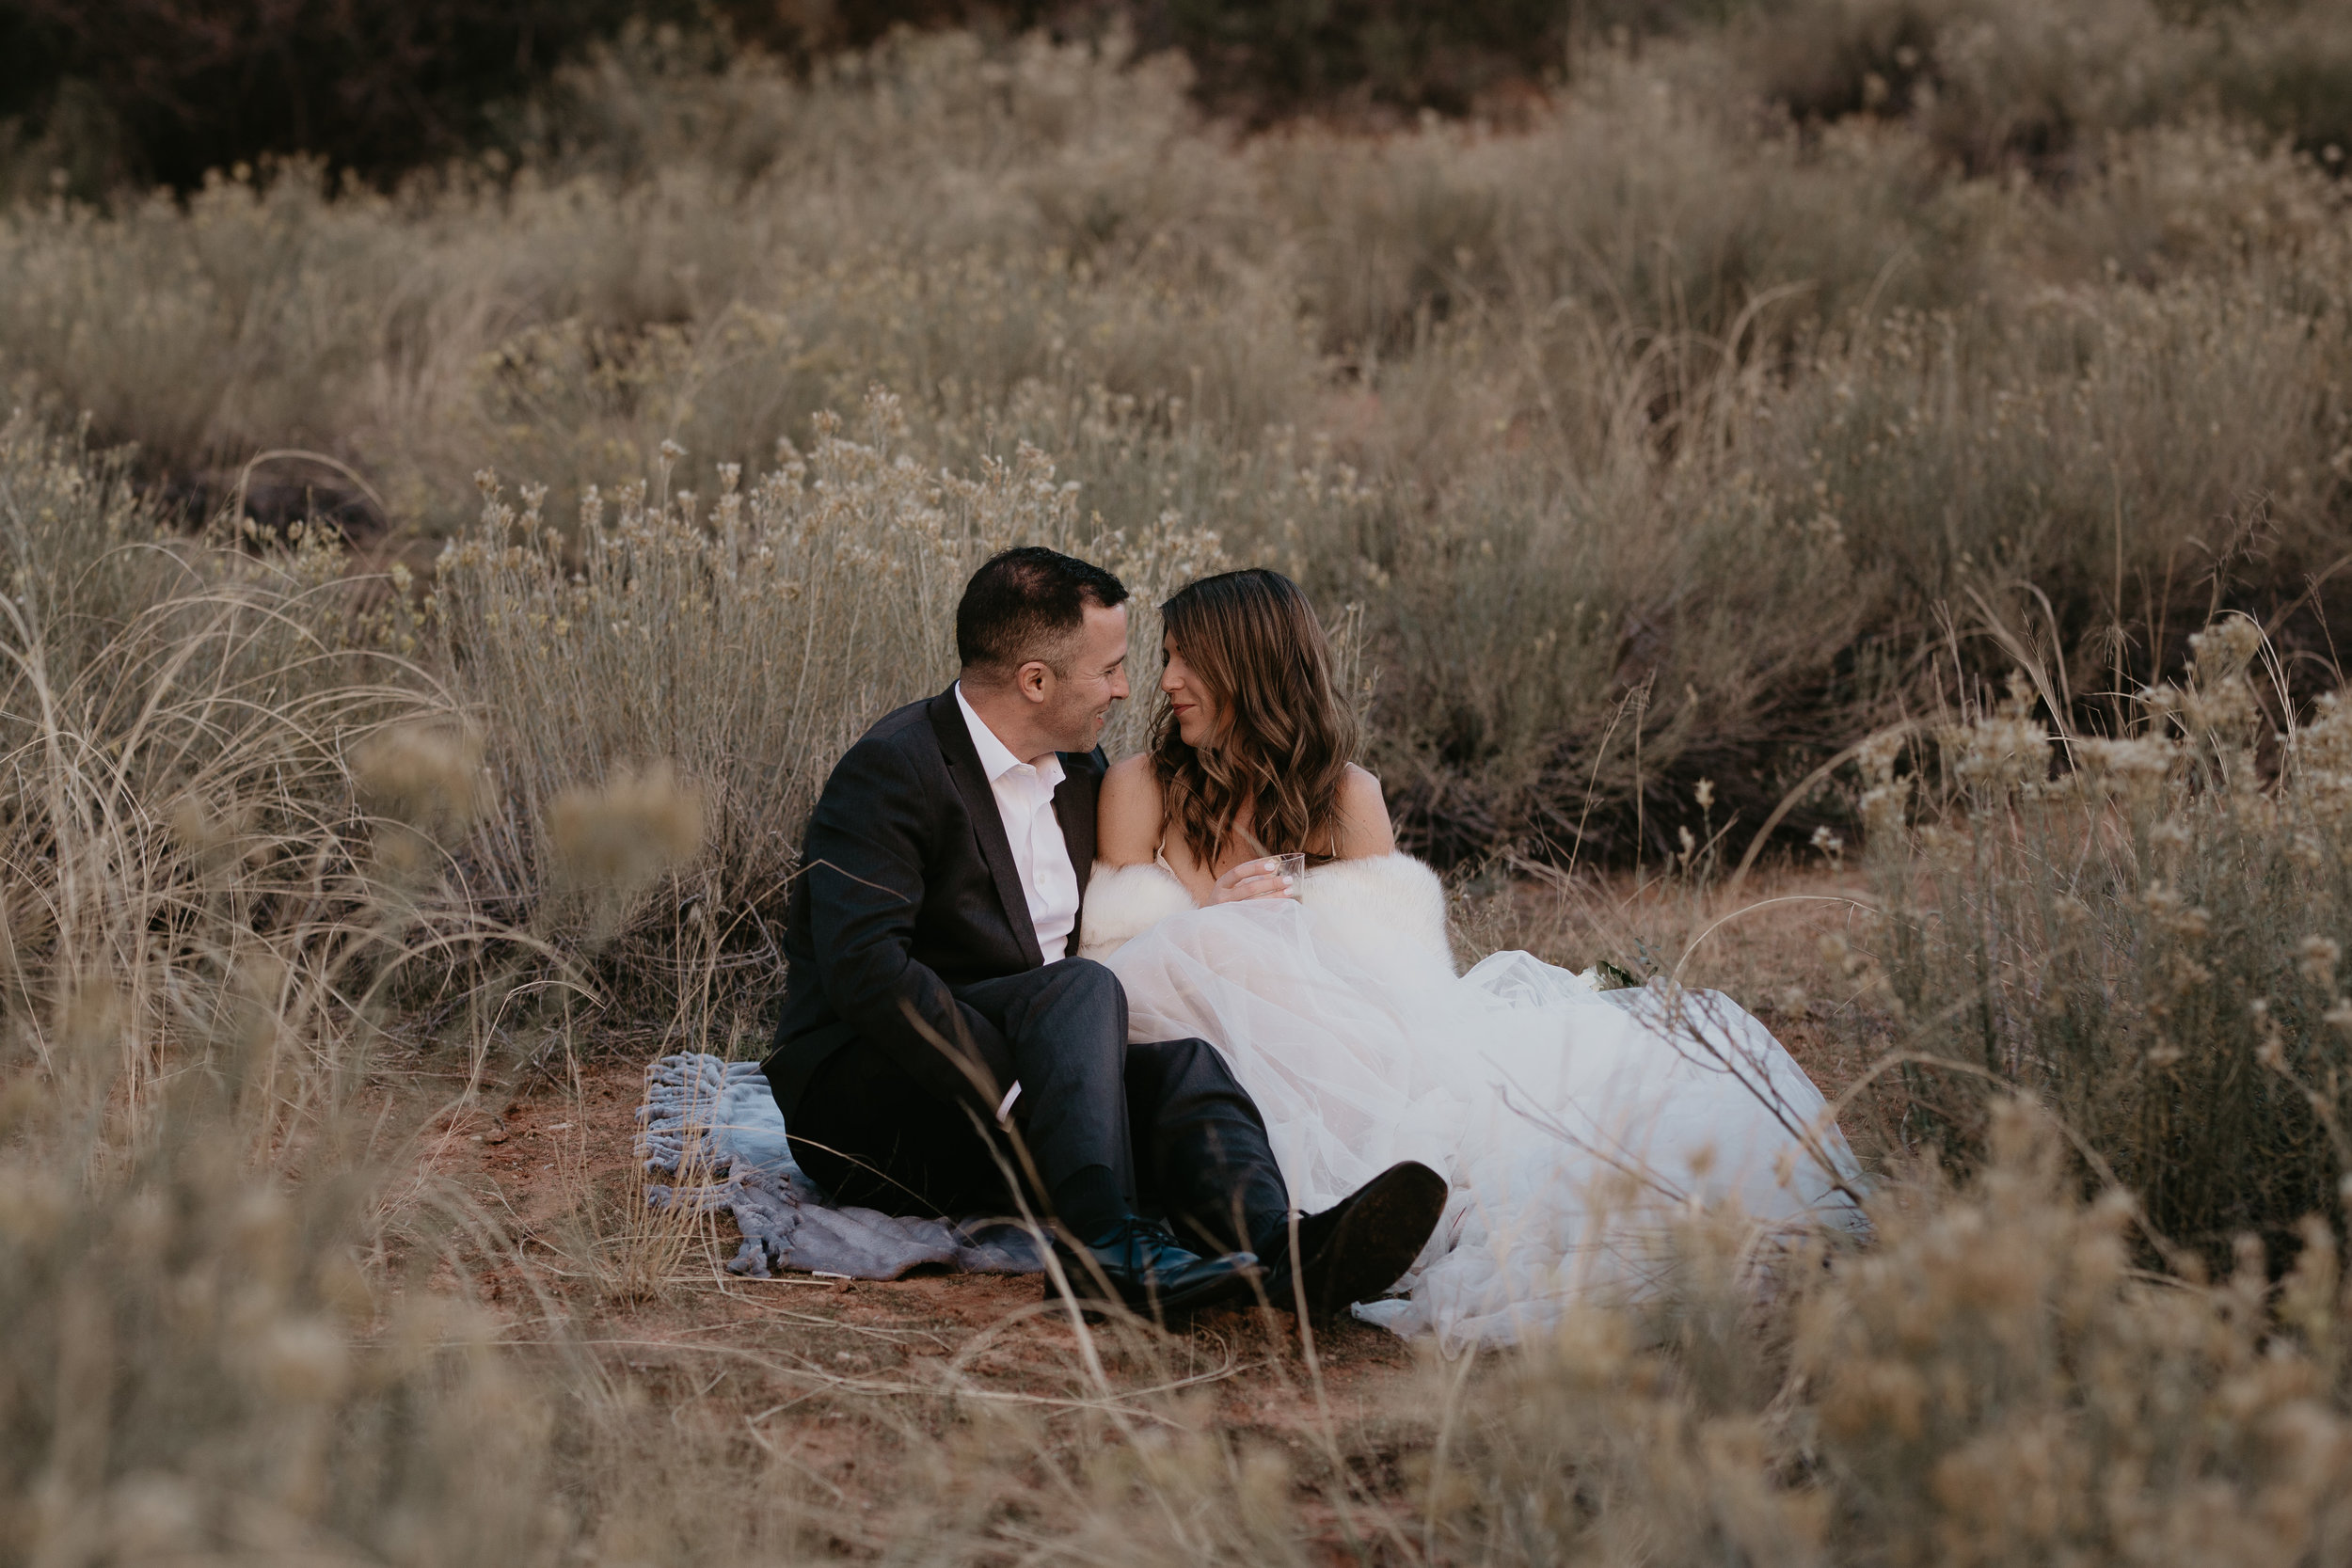 nicole-daacke-photography-zion-national-park-elopement-photographer-canyon-overlook-trail-elope-hiking-adventure-wedding-photos-fall-utah-red-rock-canyon-stgeorge-eloping-photographer-7.jpg